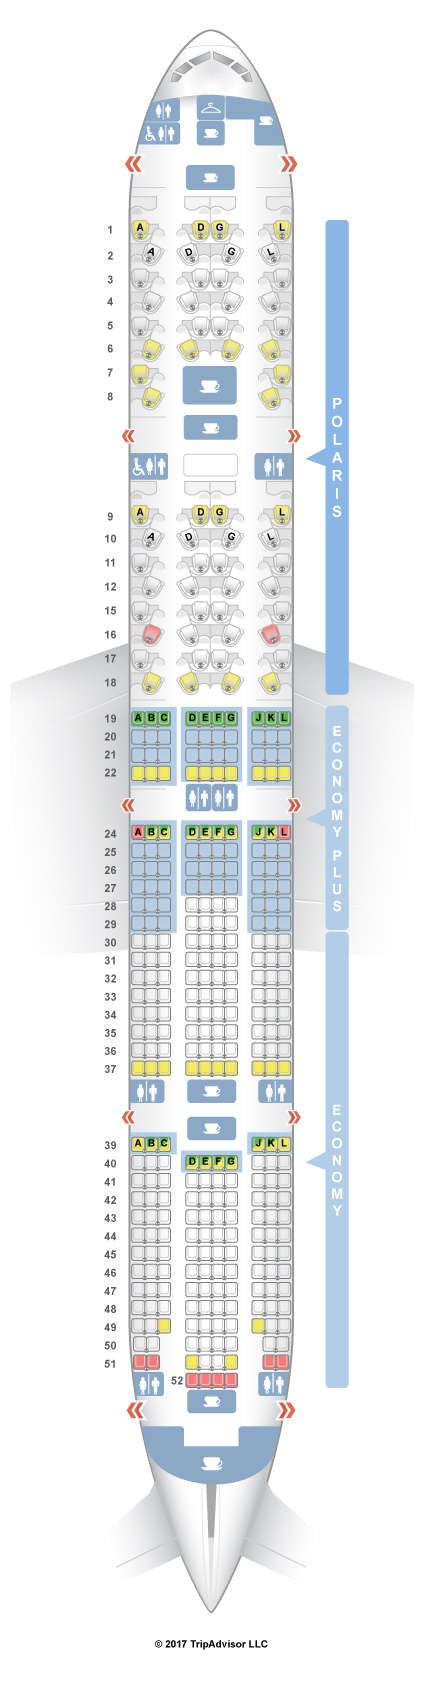 united airlines seating chart 777 300er